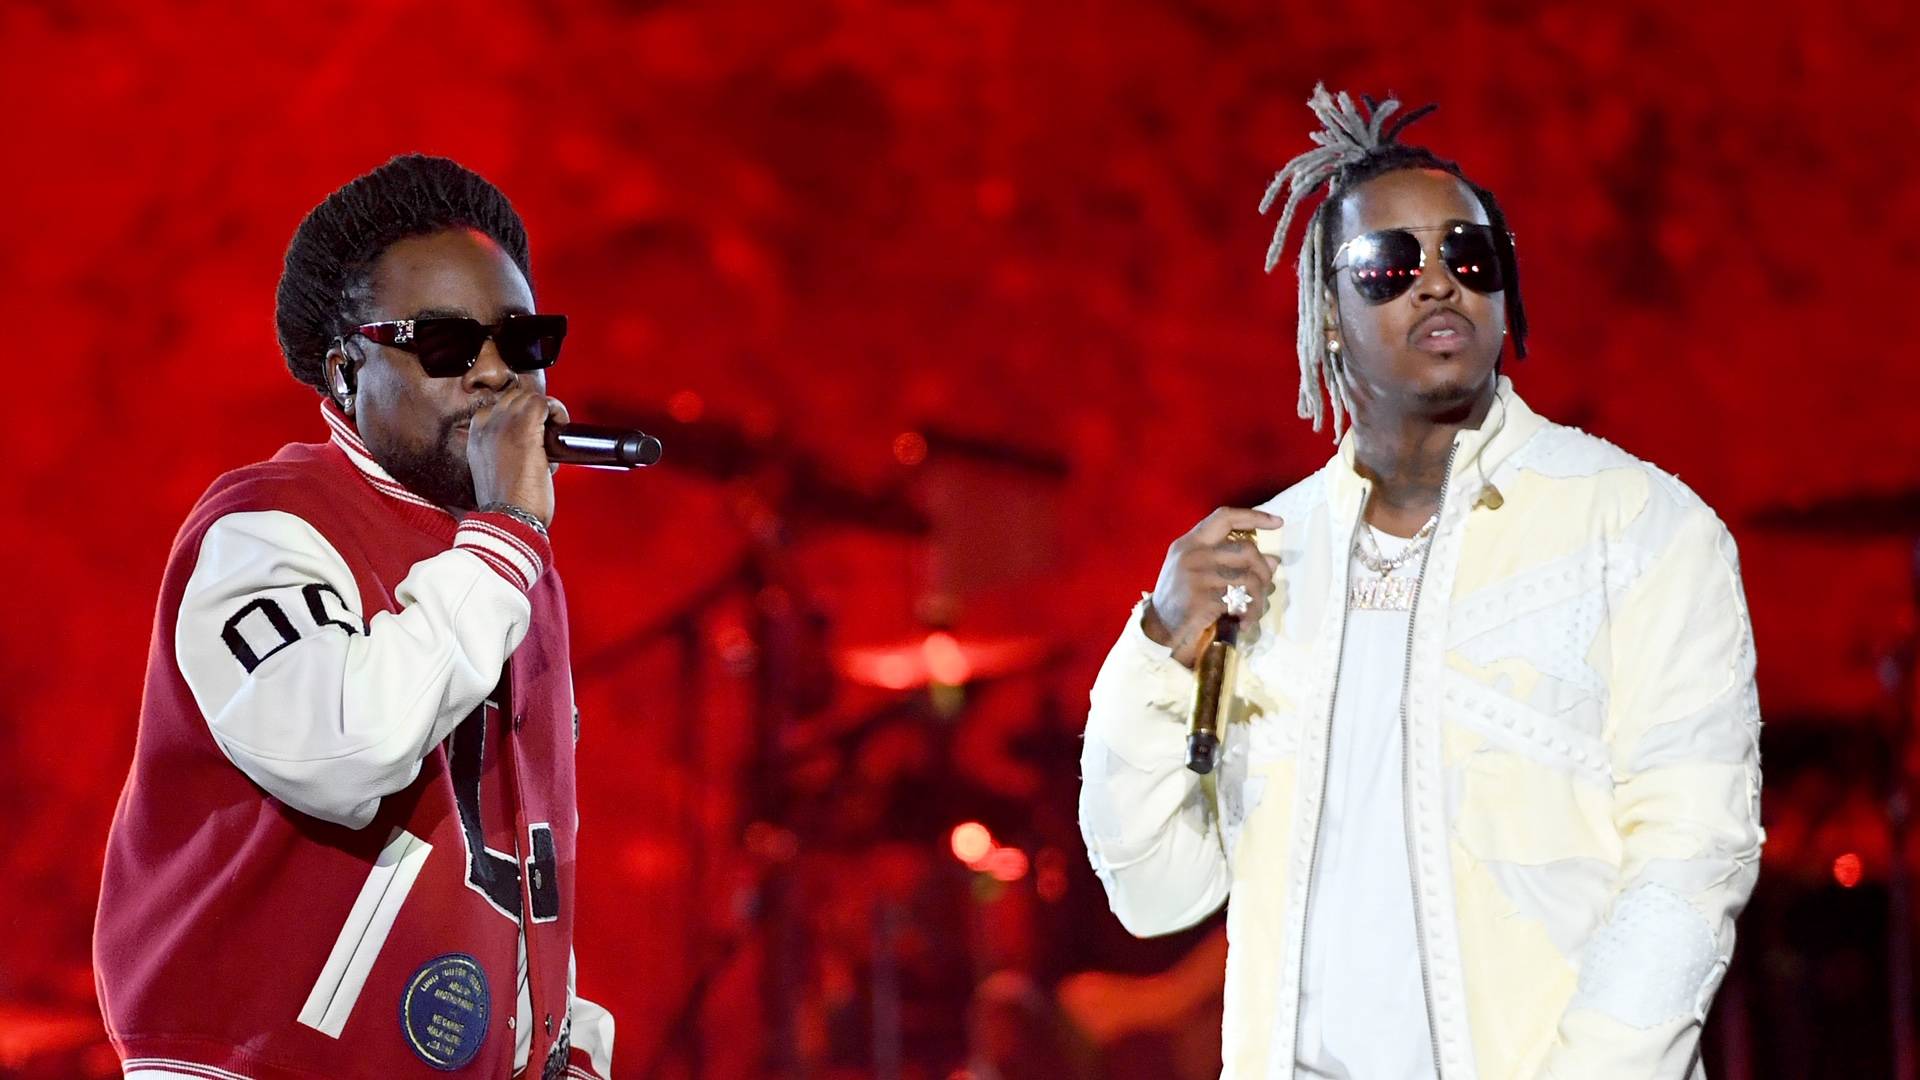 Wale and Jeremih on BET Buzz 2020.